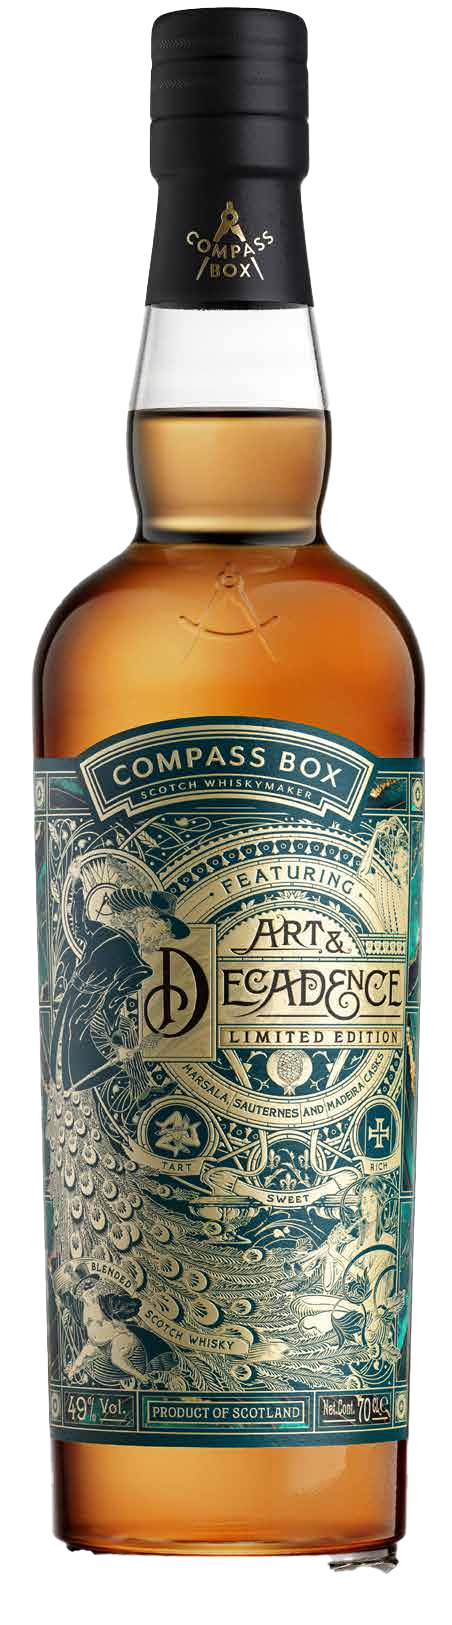 Compass Box Blended Scotch Whisky Art of Decadence